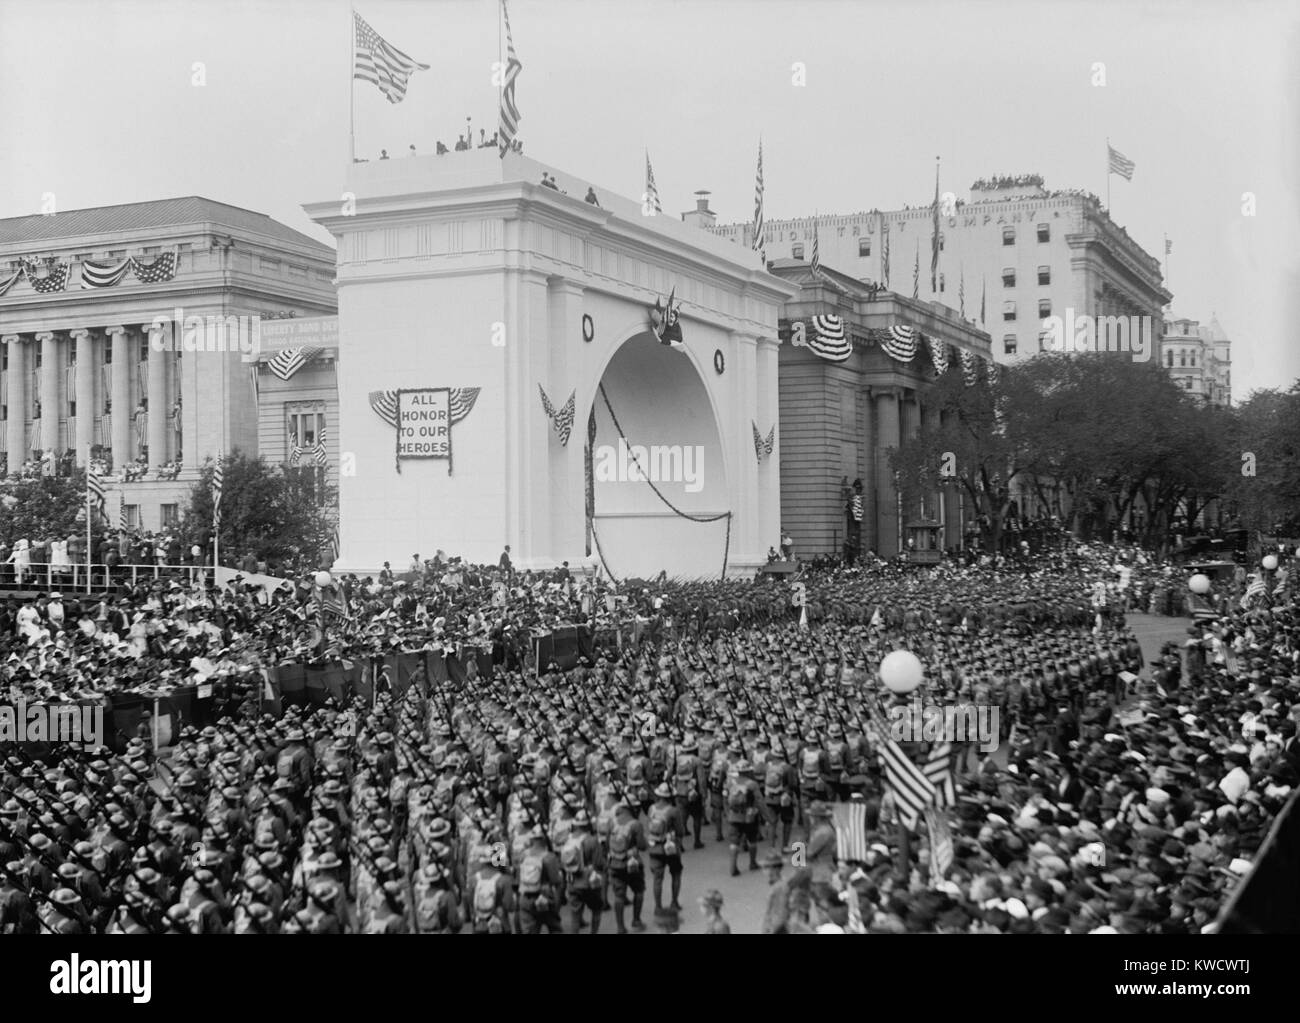 World War 1 victory parade passing a Triumphal Arch, in New York City, Sept. 10, 1919. The First Division of American Expeditionary Forces wearing trench helmets and full combat gear, marched down Fifth Avenue from 107th Street to Washington Square (BSLOC 2017 1 26) Stock Photo